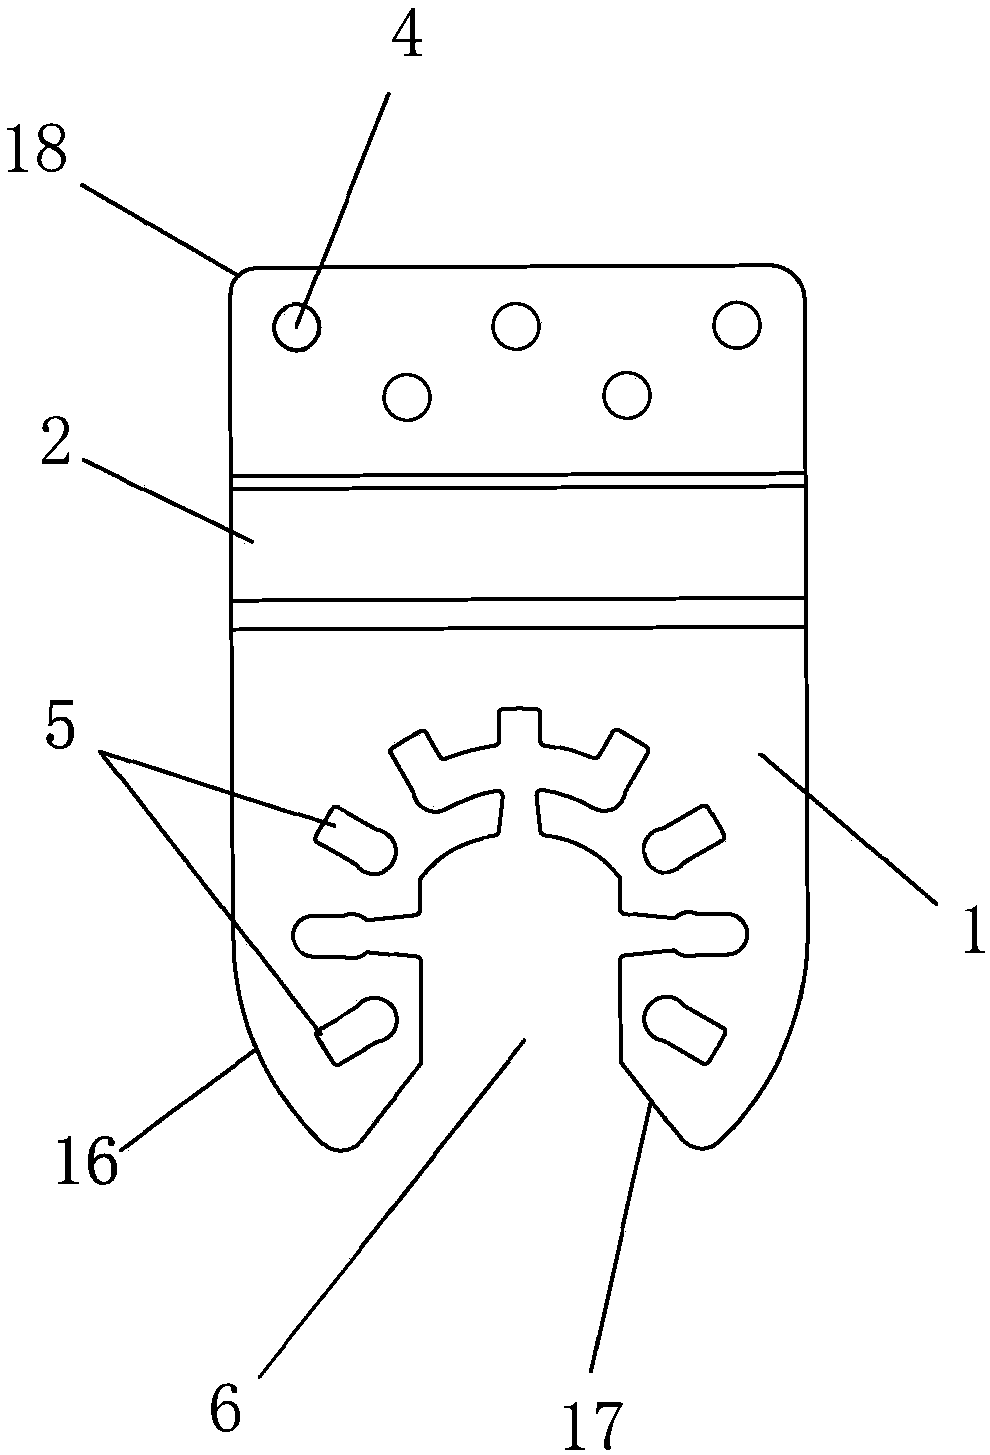 Process method of stamping forming of saw arm of swing saw